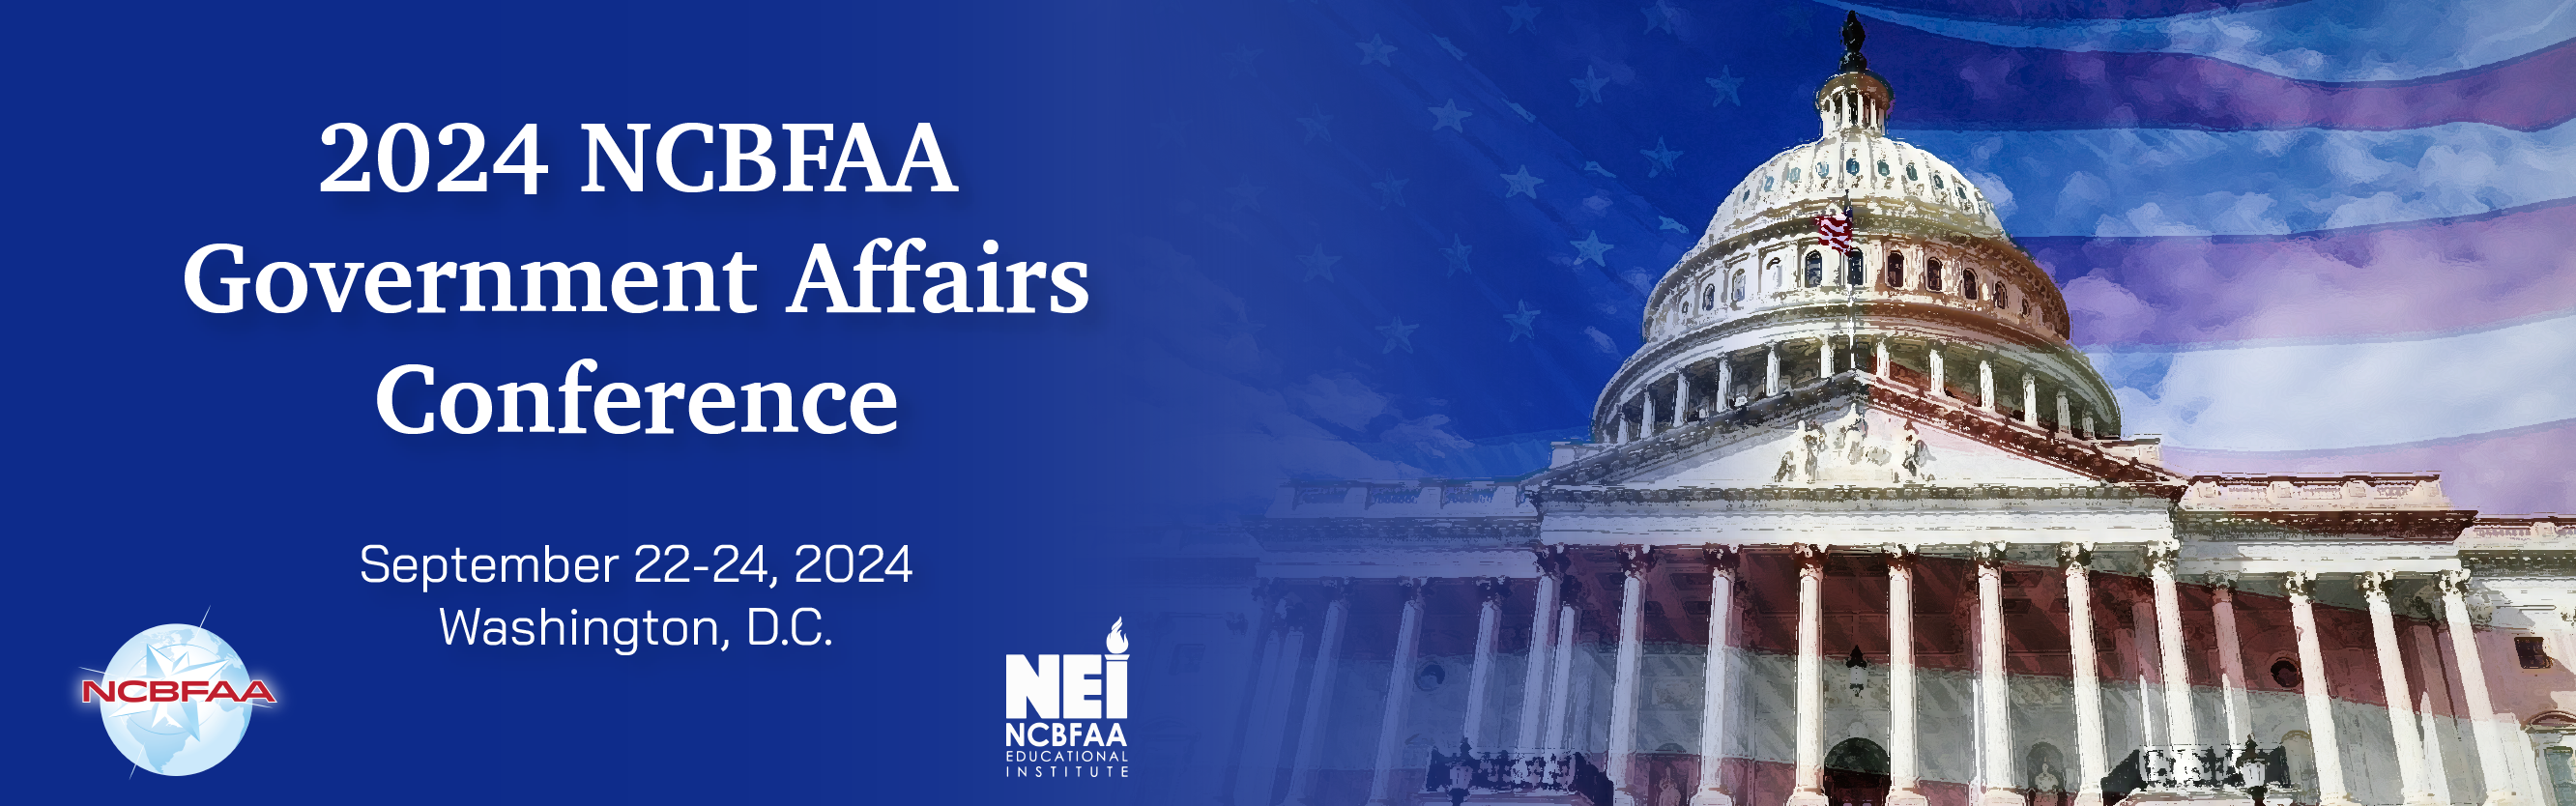 2024 NCBFAA Government Affairs Conference Banner